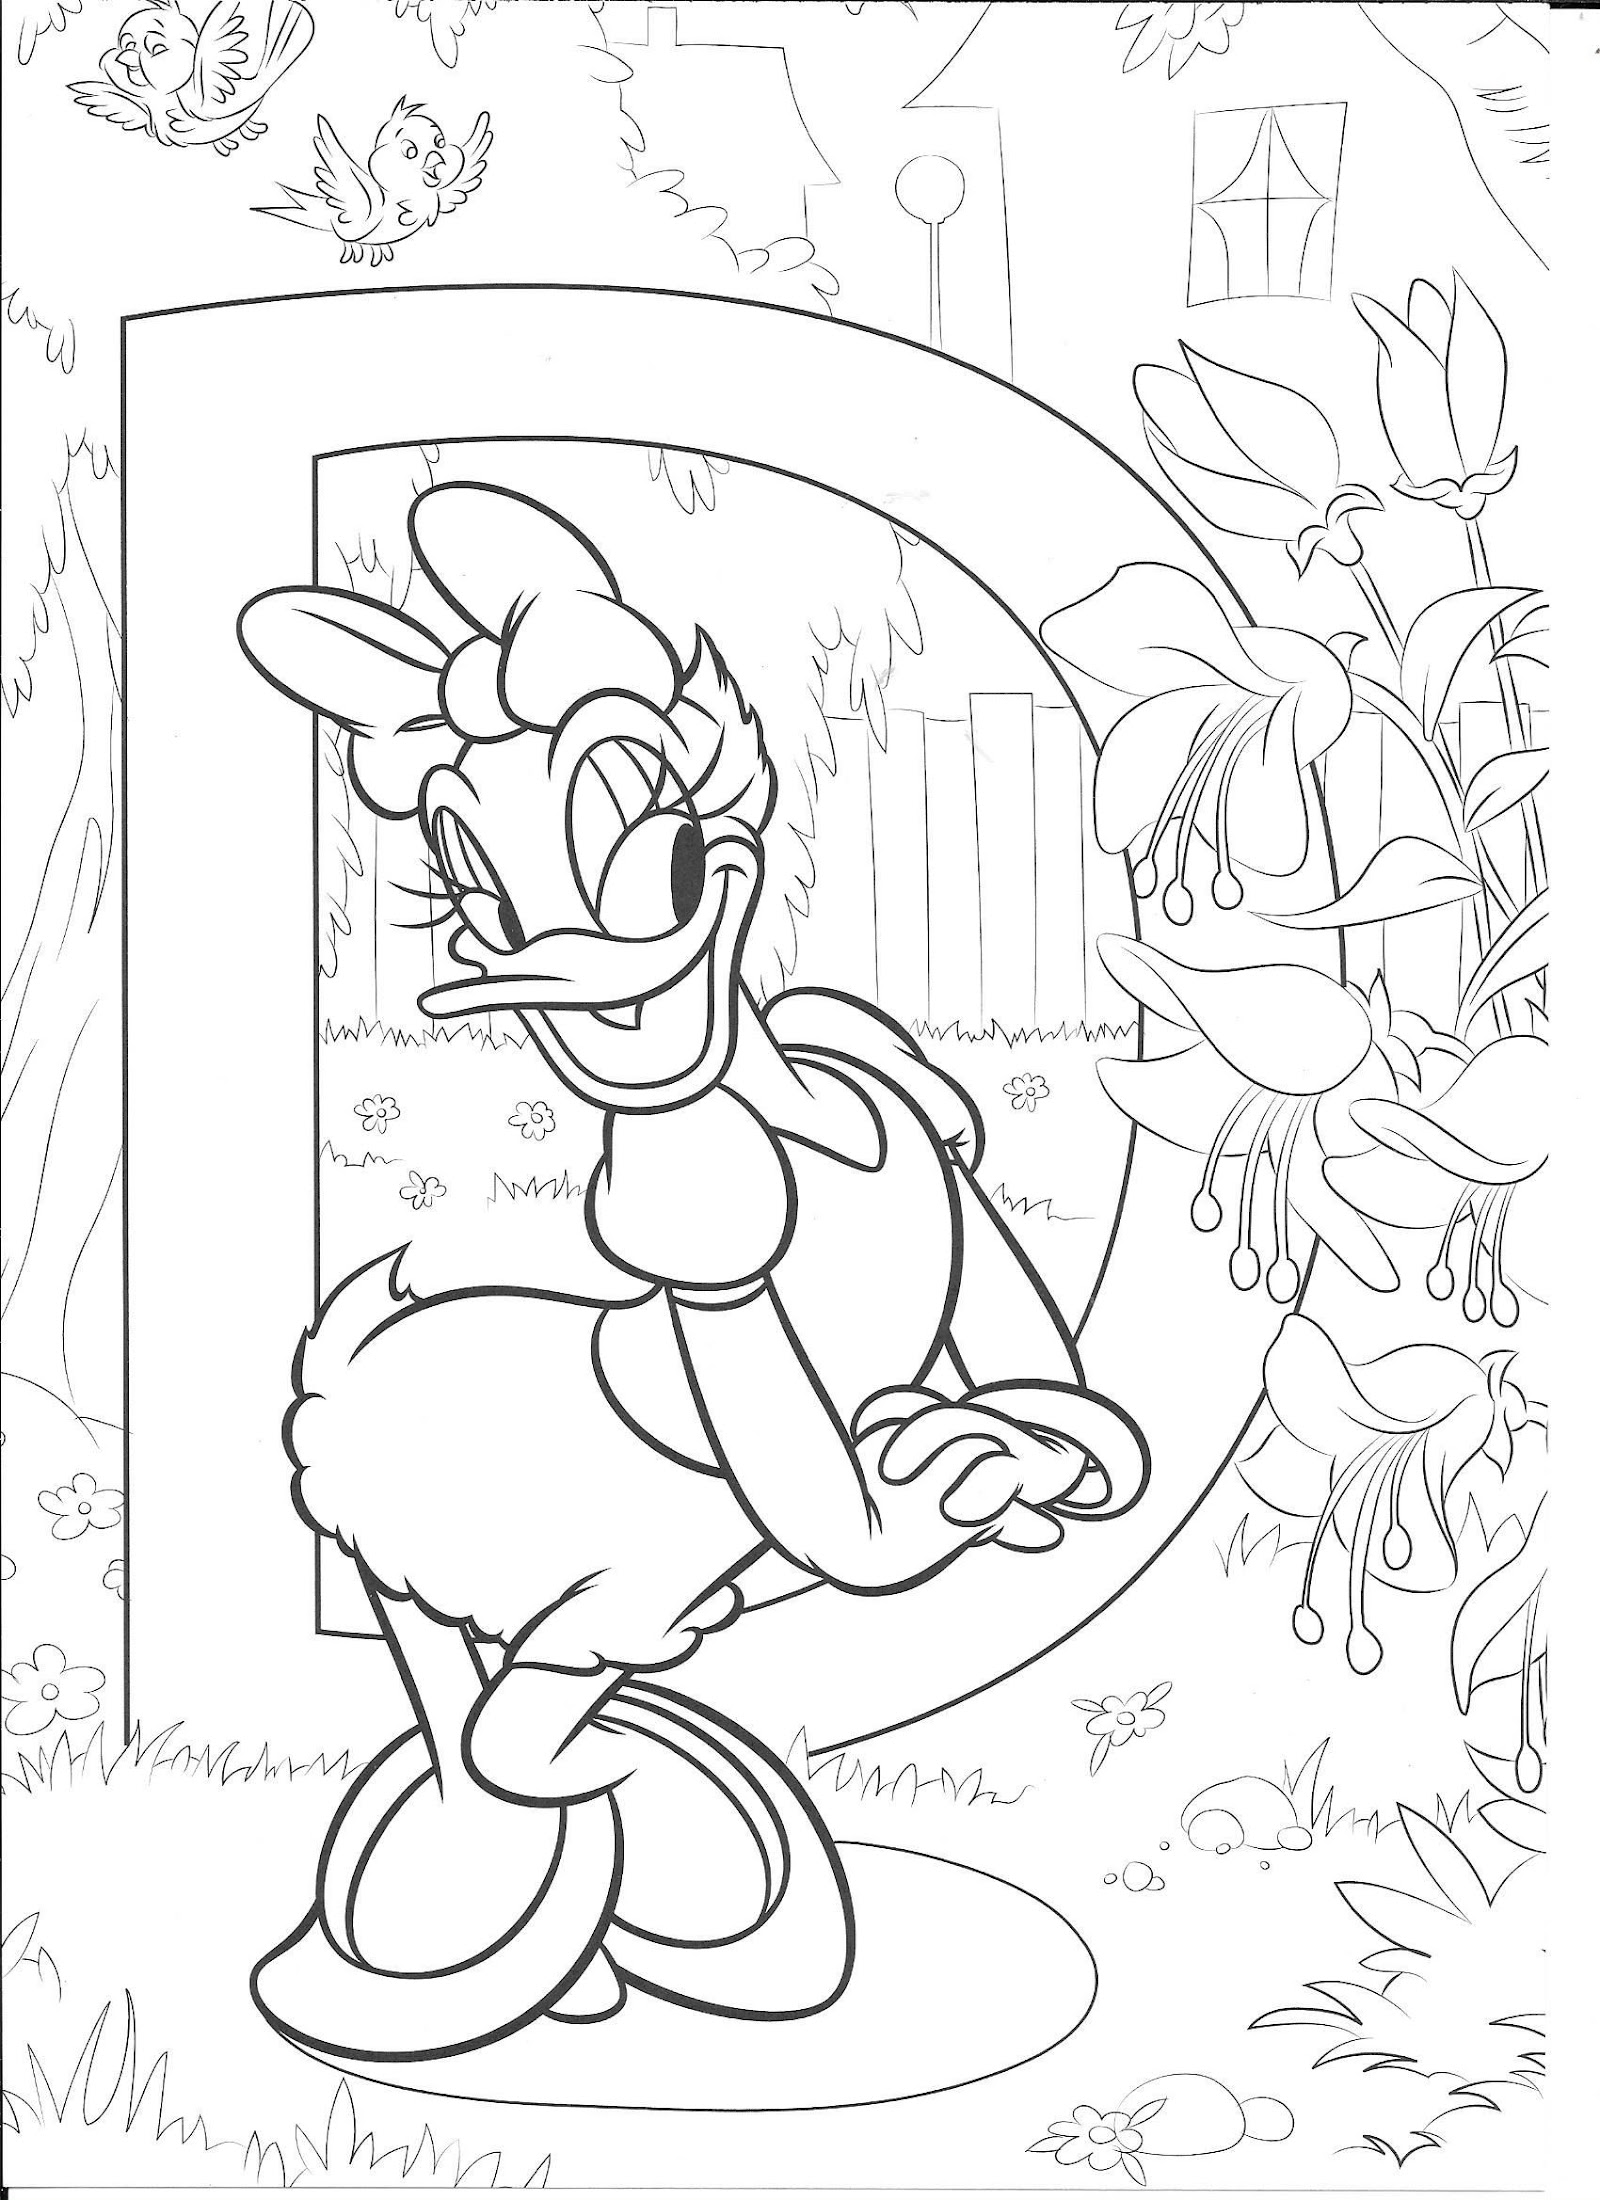 Disney Alphabet Coloring Page - 202+ File for Free